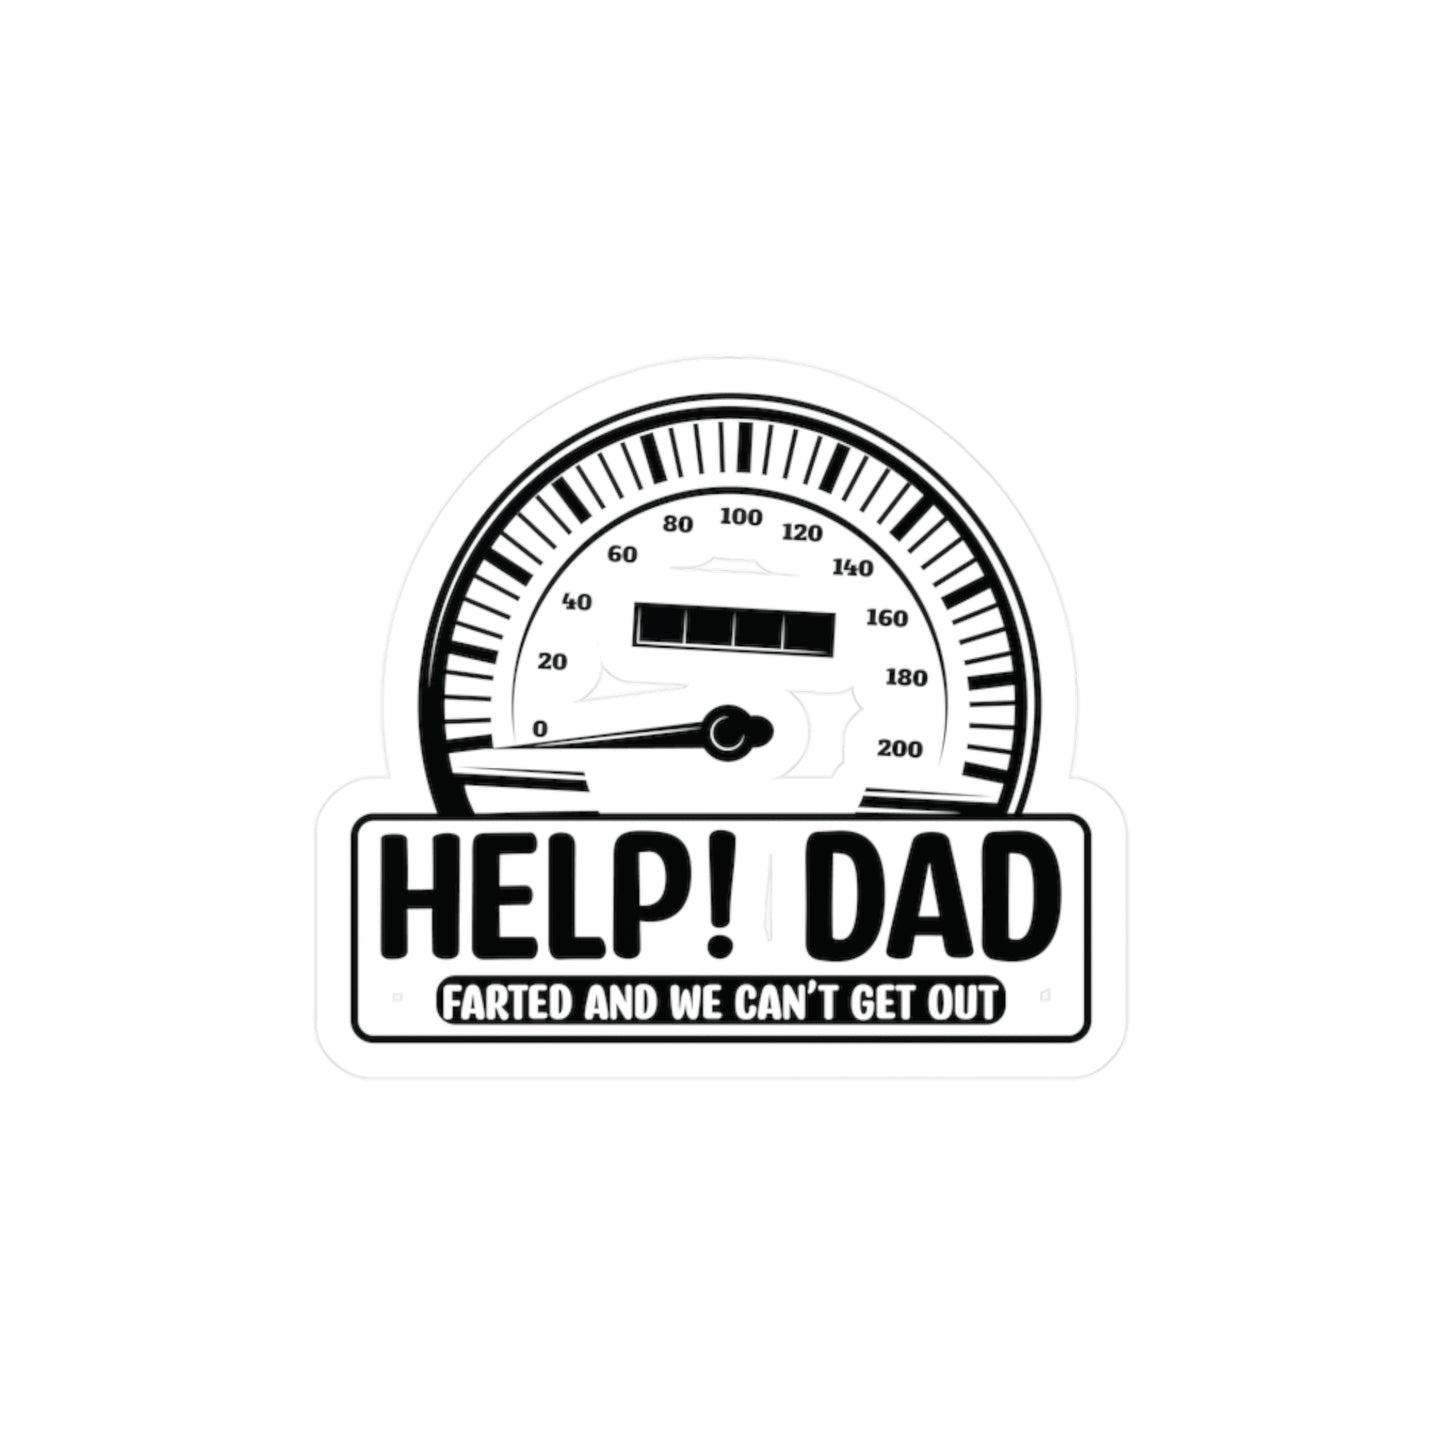 Help Dad Farted and we can't get out Car Sticker Decal Sticker Christmas Gift